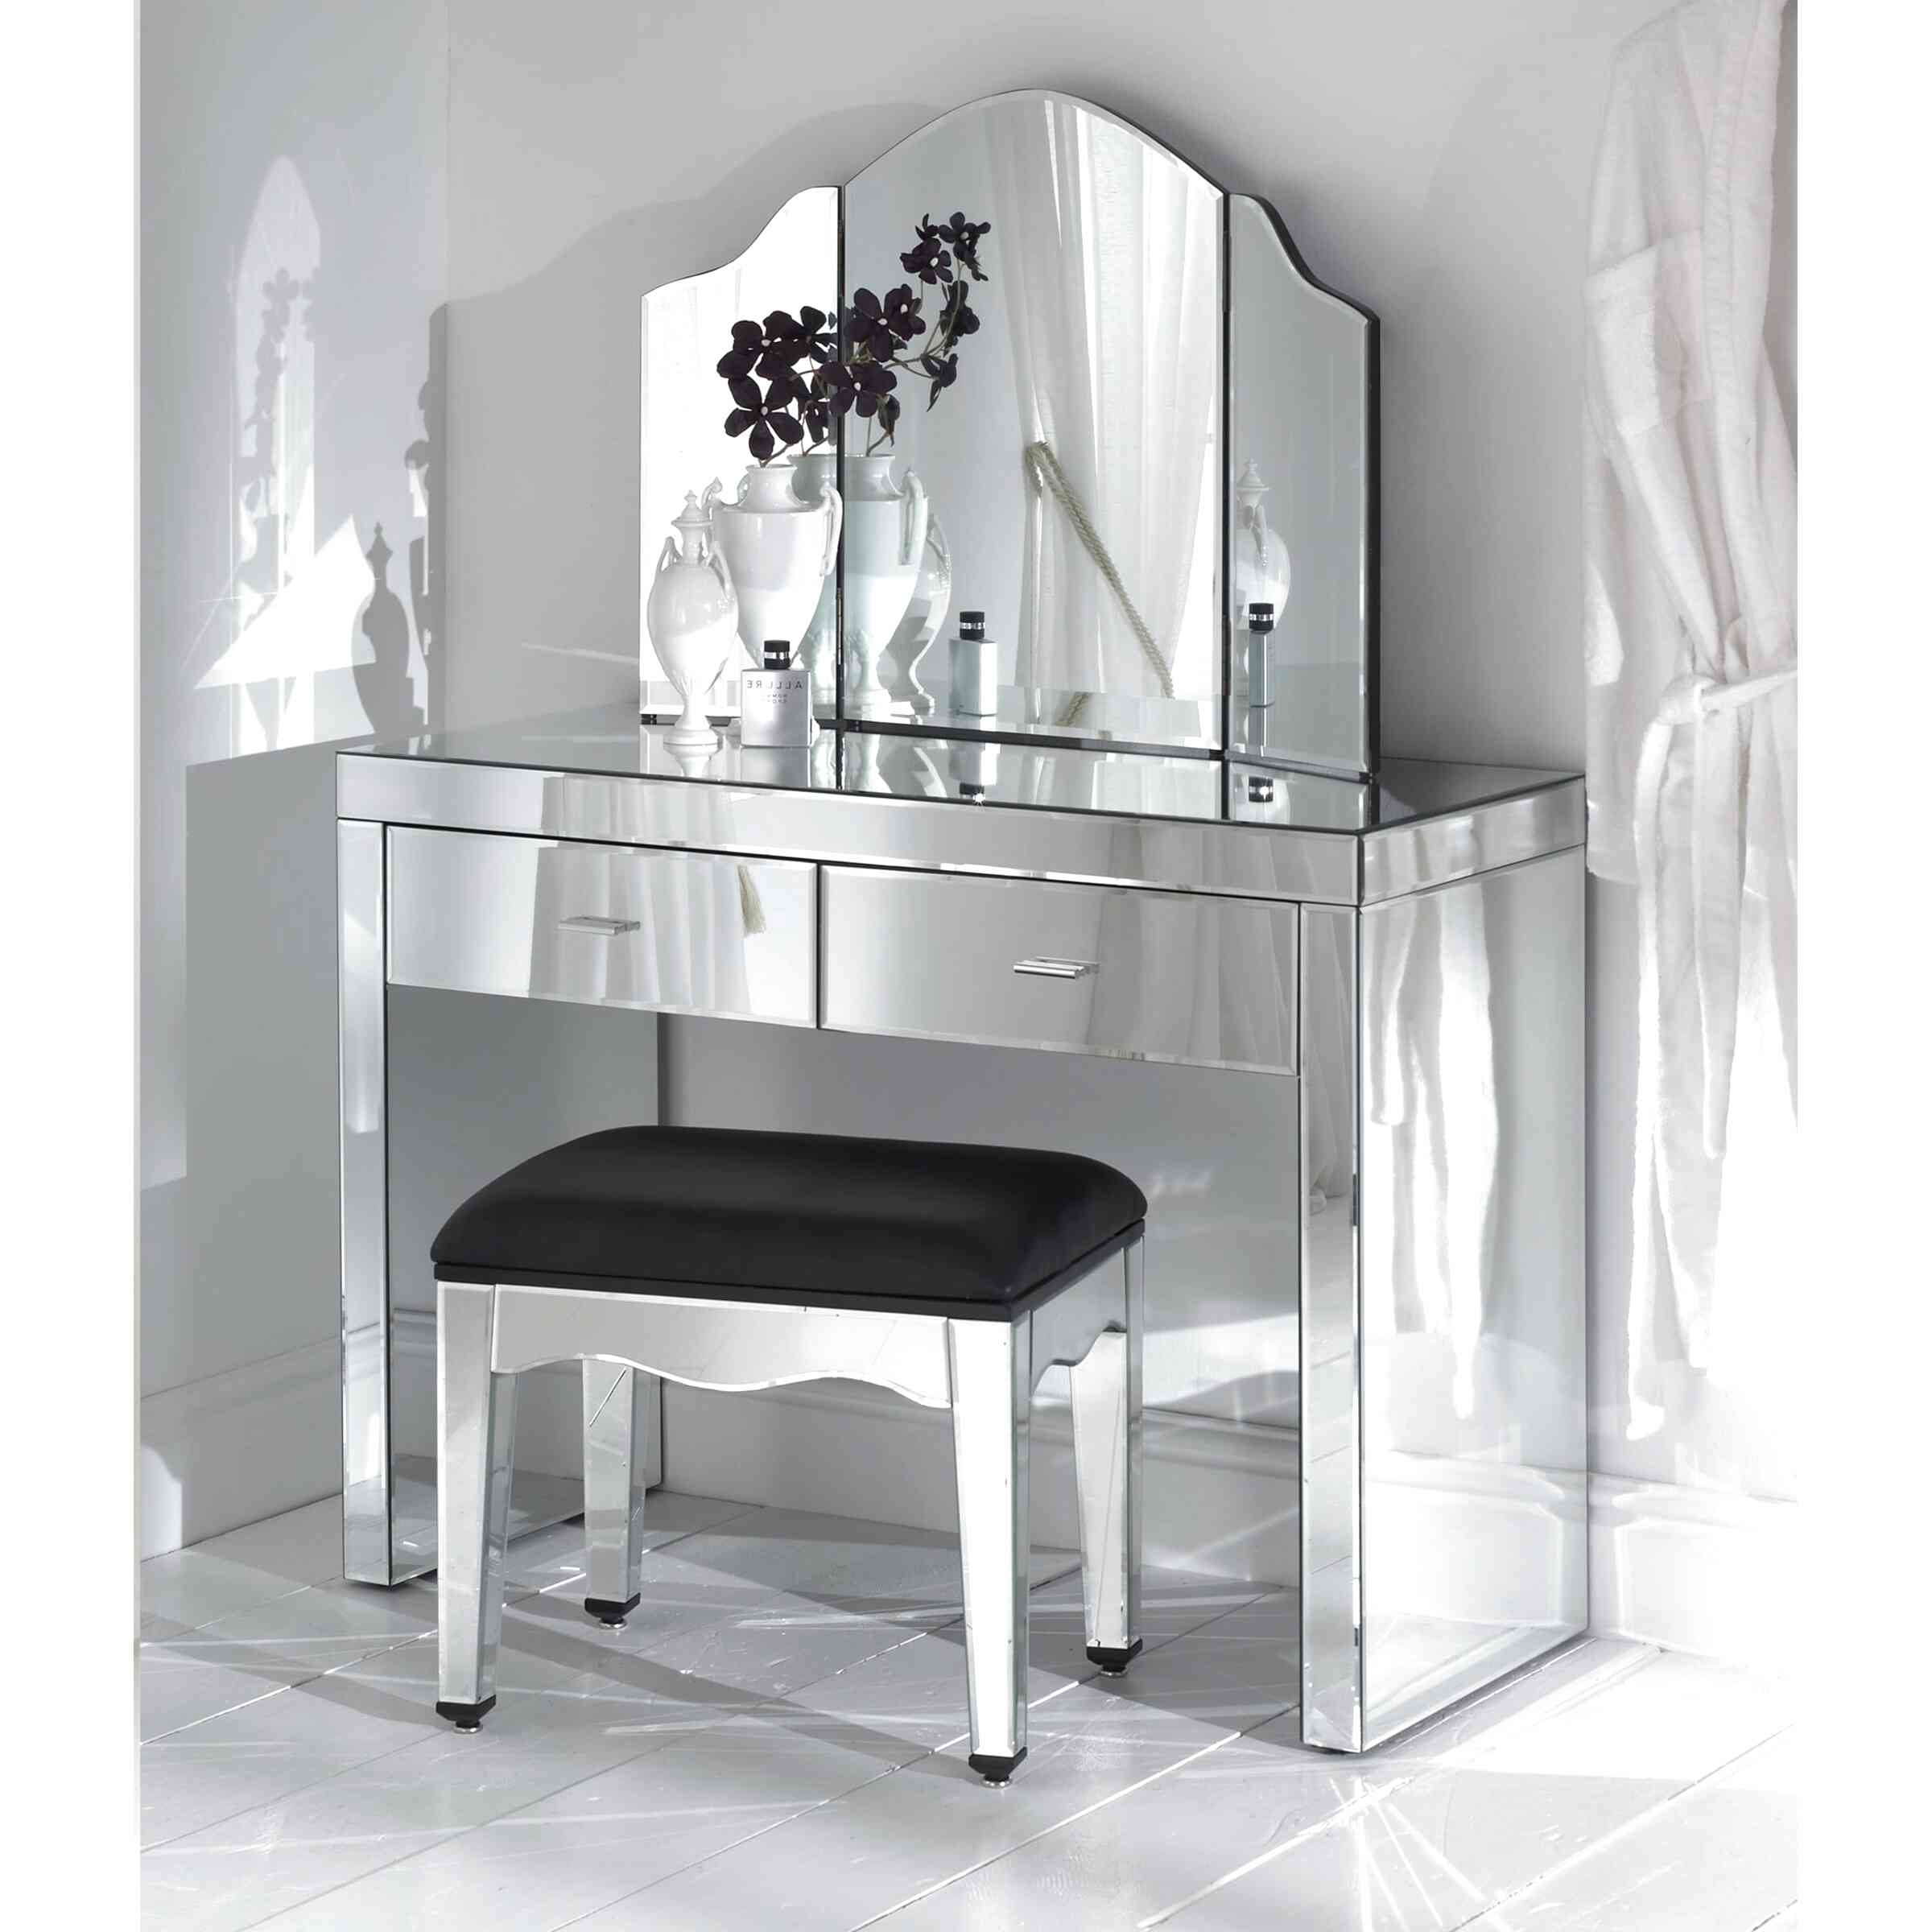 Mirrored Dressing In Ireland, Vanity Table With Mirror Ireland